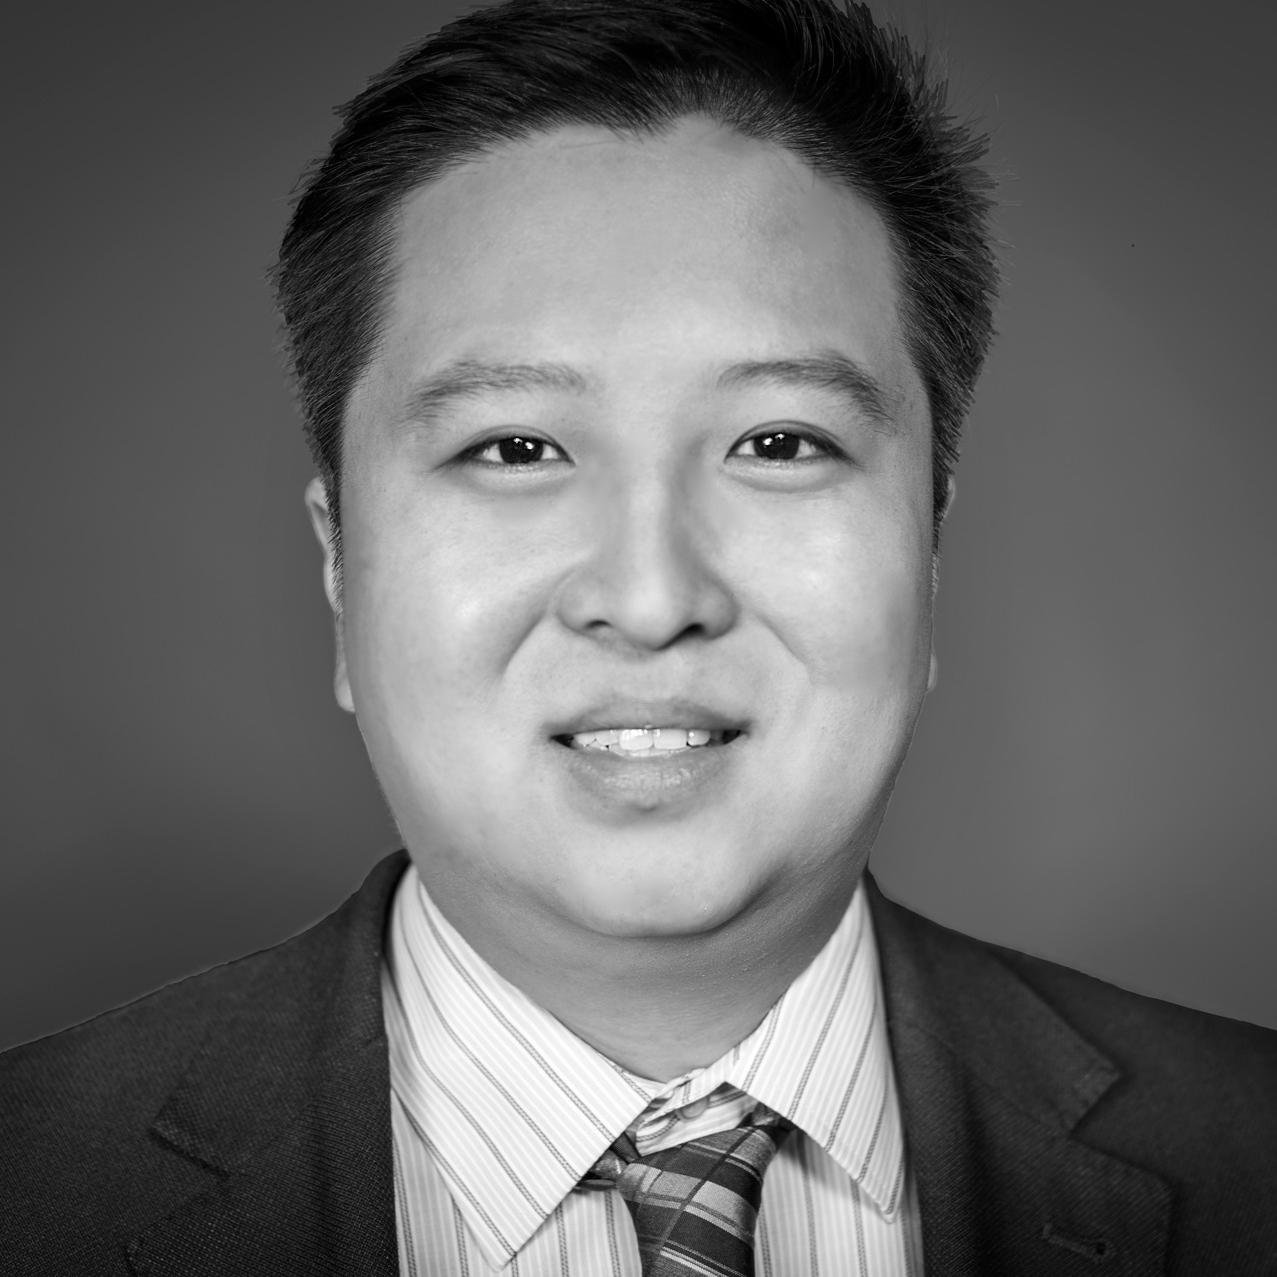 Bitcoin consultant. Founder of #SFUBitcoin, CEO of #Saftonhouse. Member of the Bitcoin Foundation. Check out mikeyeung.ca